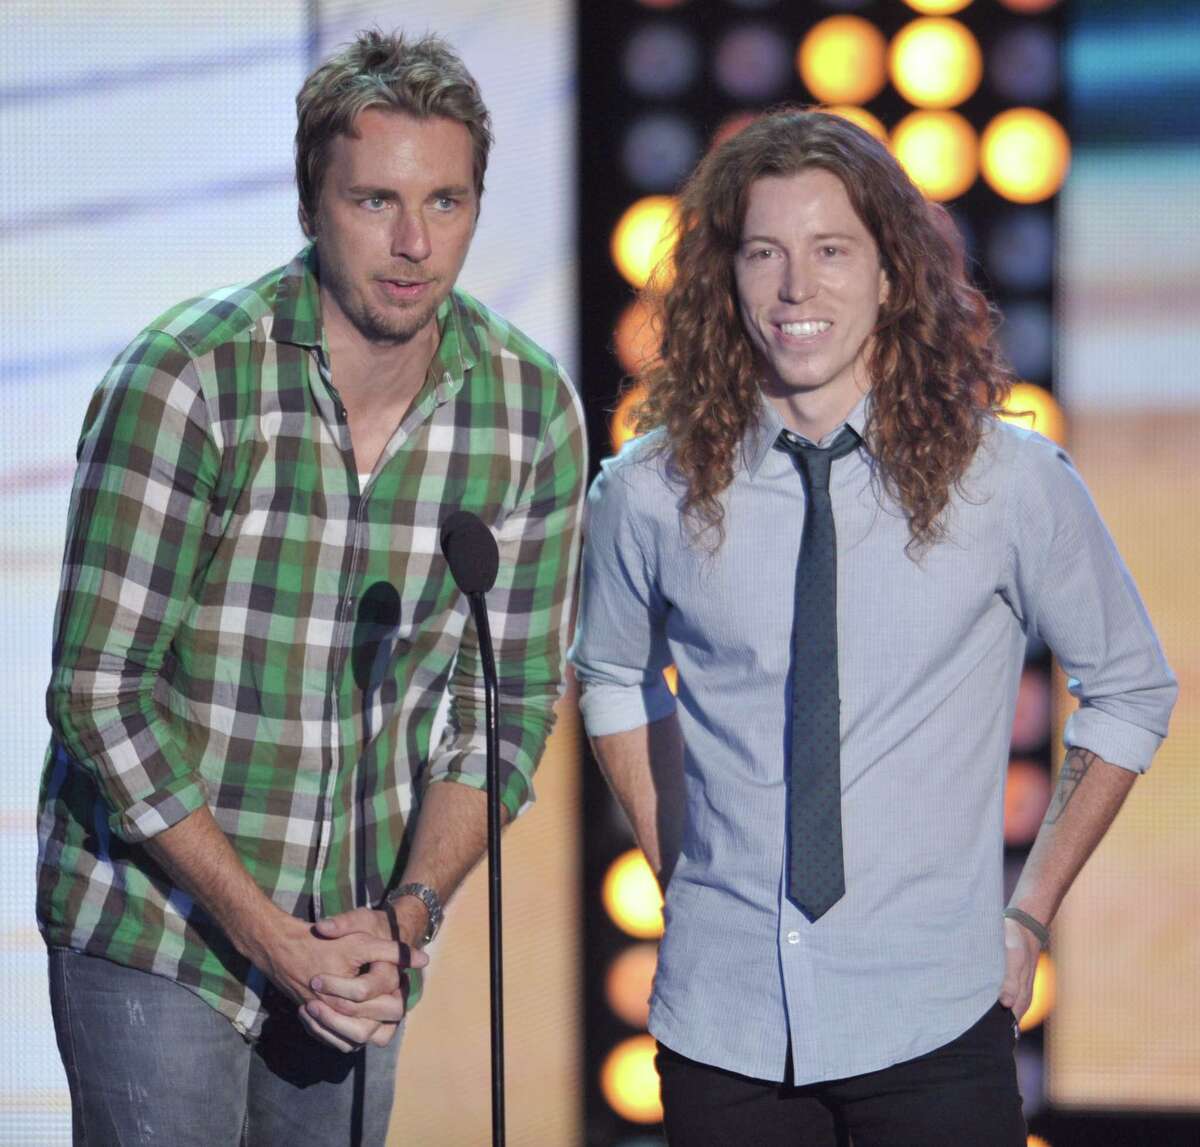 Dax Shepard, left, and Shaun White speak onstage at the Teen Choice Awards on Sunday, July 22, 2012, in Universal City, Calif. (Photo by John Shearer/Invision/AP)